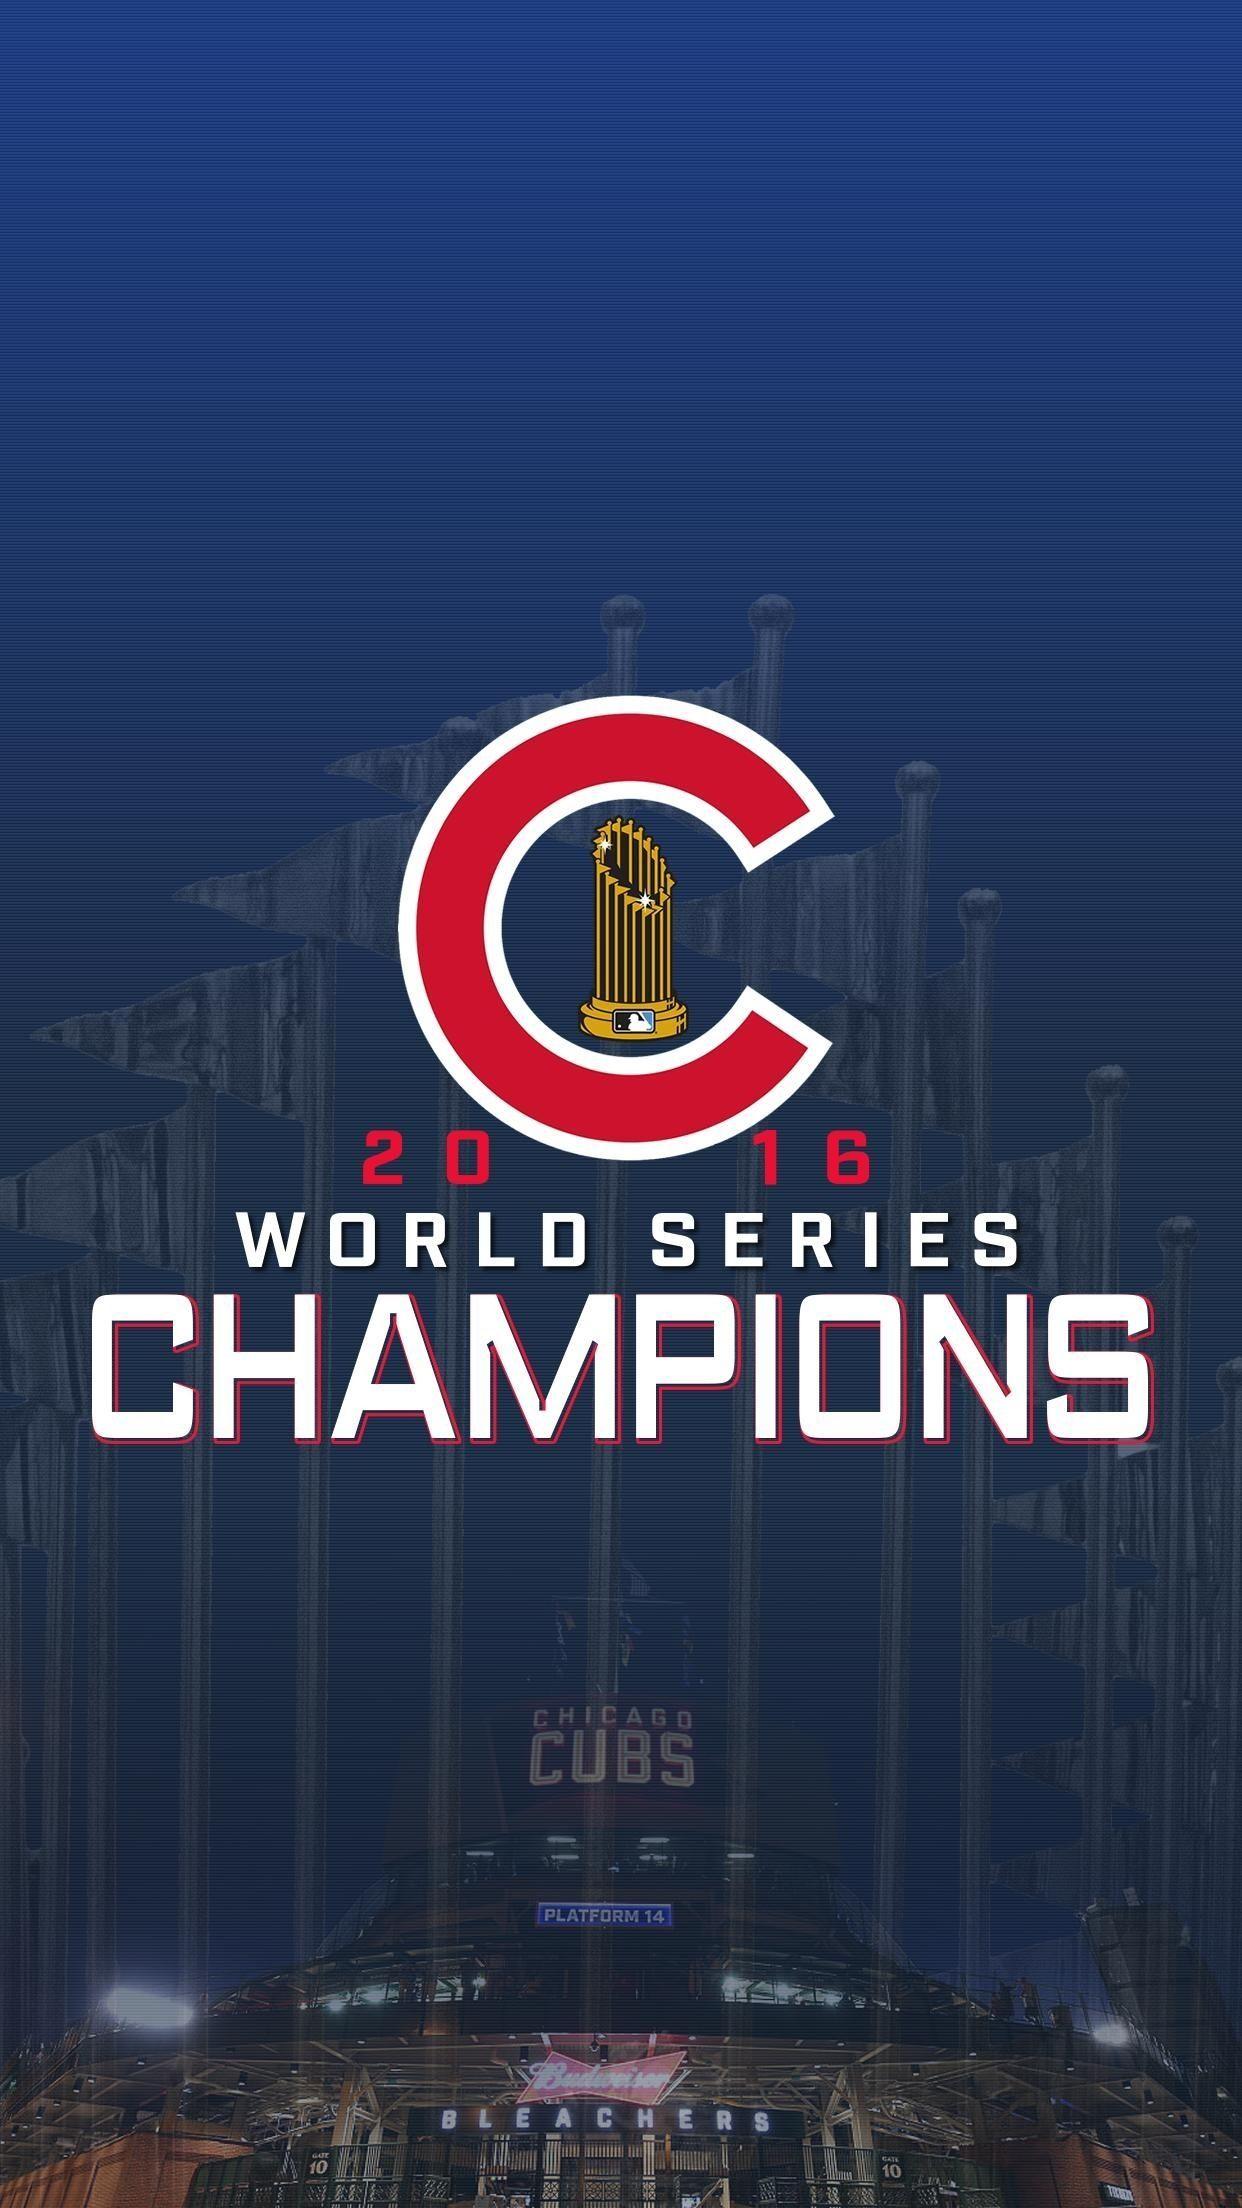 Wrigley Field Sign Phone Wallpapers  Wallpaper Cave